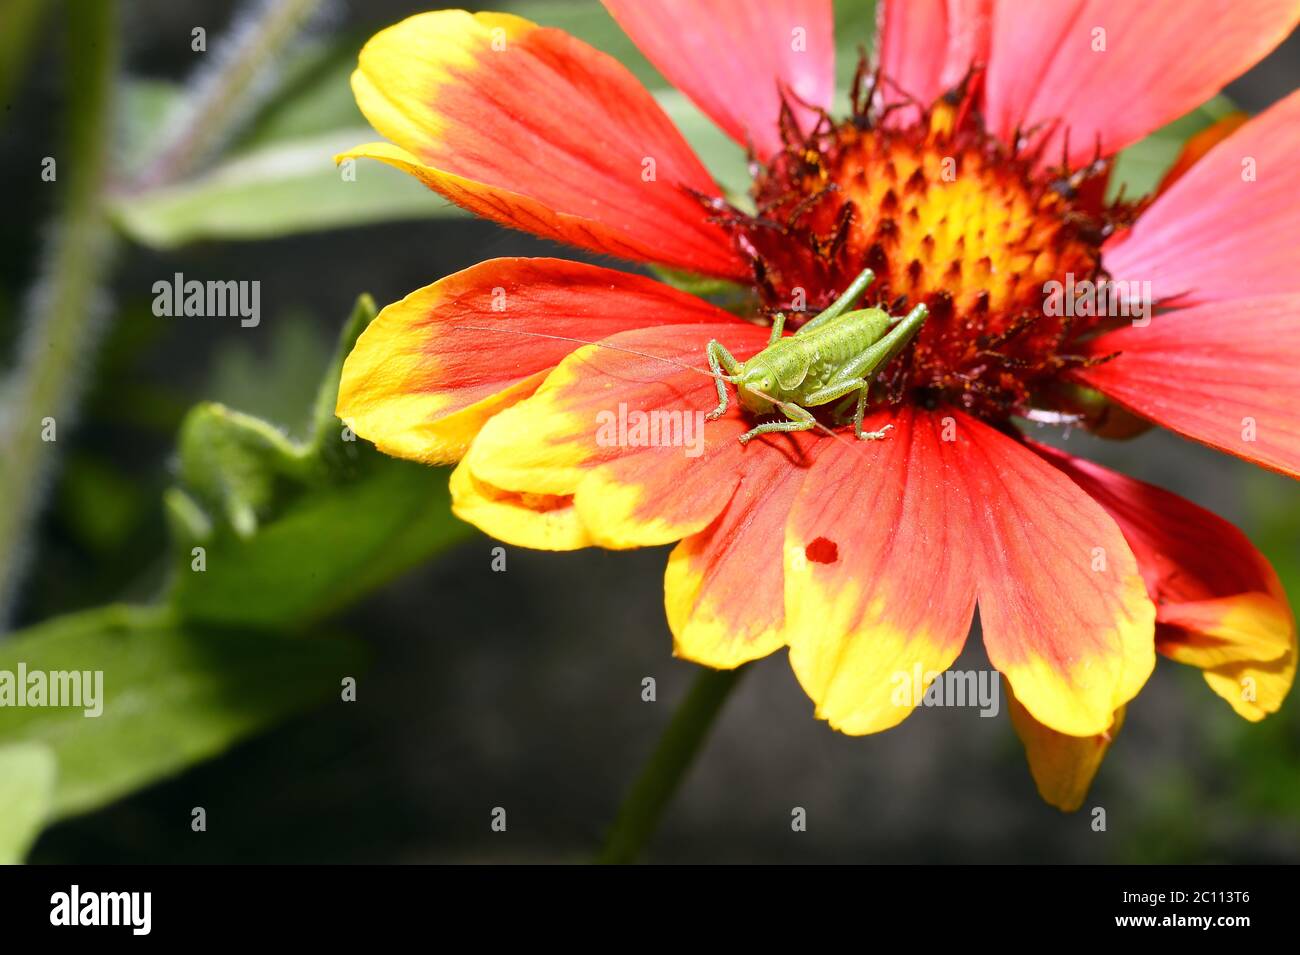 Red Helenium flower close-up with a grasshopper sitting on it Red Helenium flower close-up with a grasshopper sitting on it Stock Photo